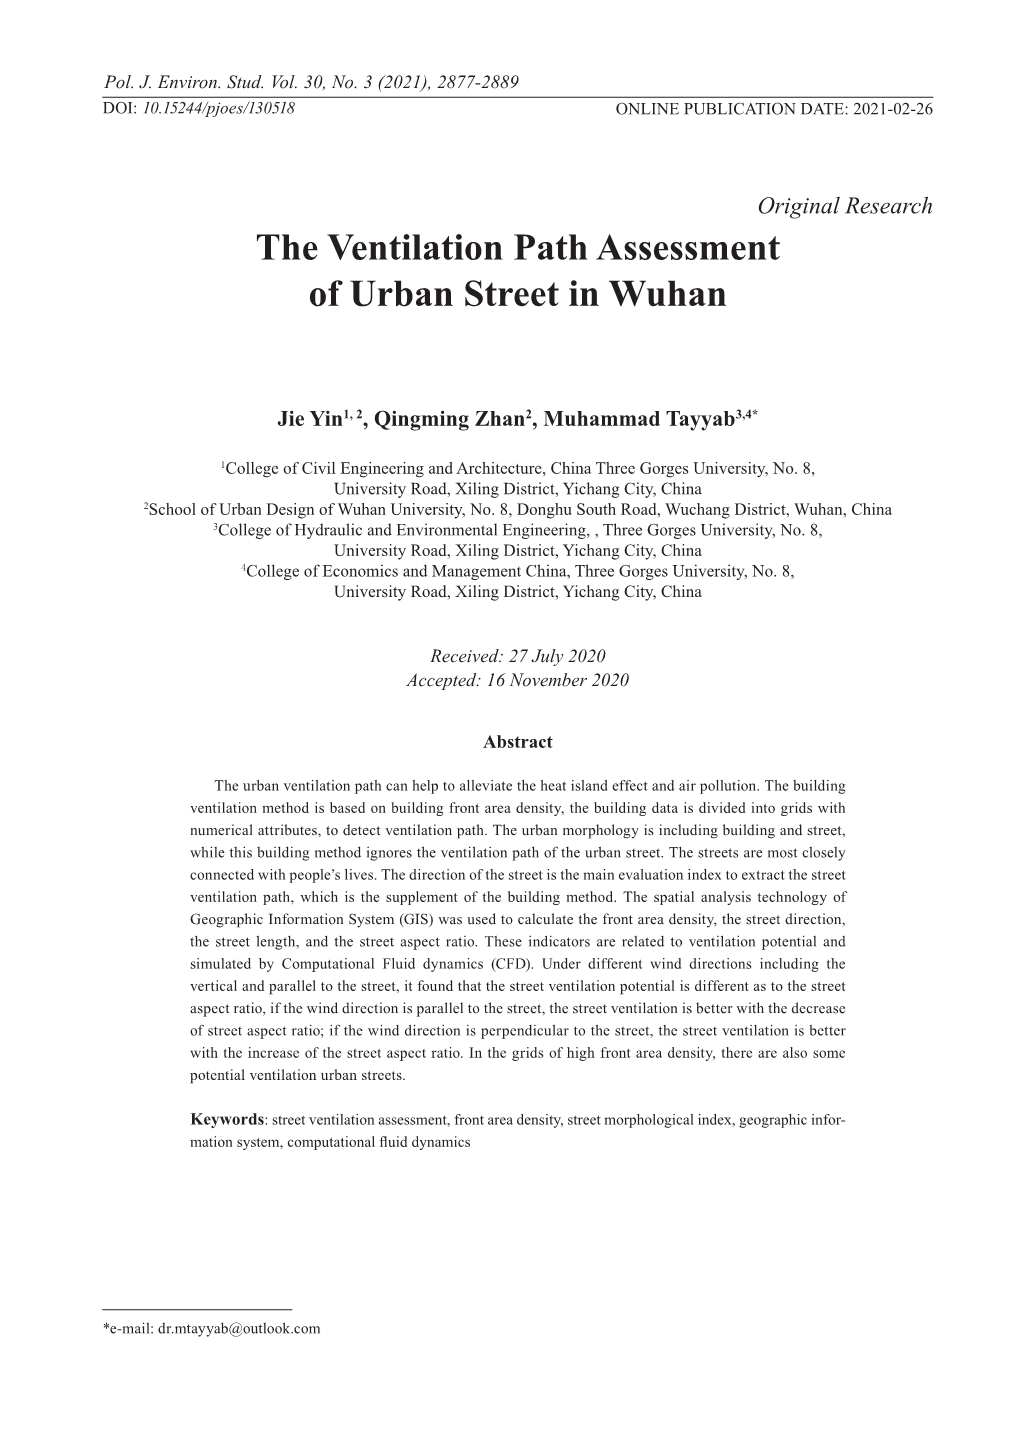 The Ventilation Path Assessment of Urban Street in Wuhan